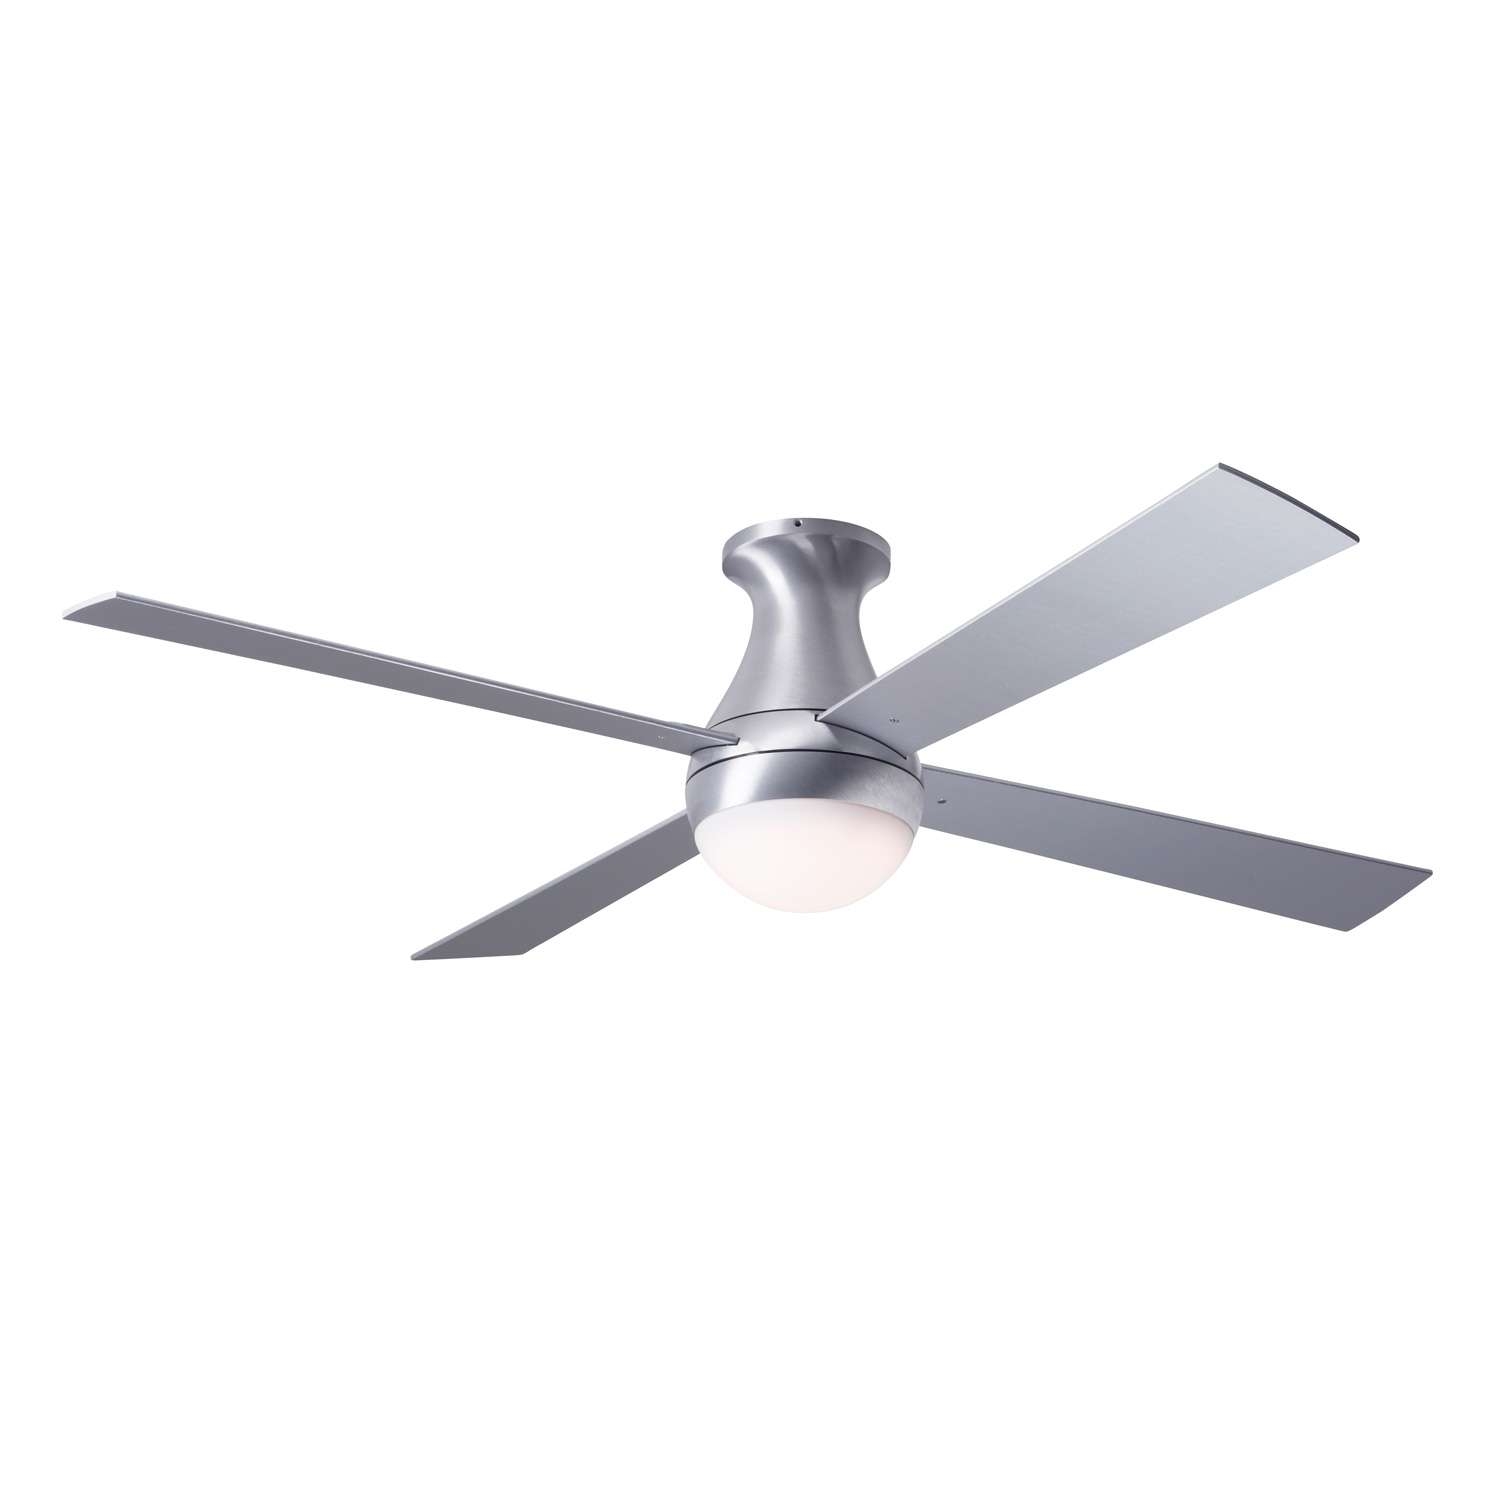 Permalink to Ball Hugger Ceiling Fan With Optional Light